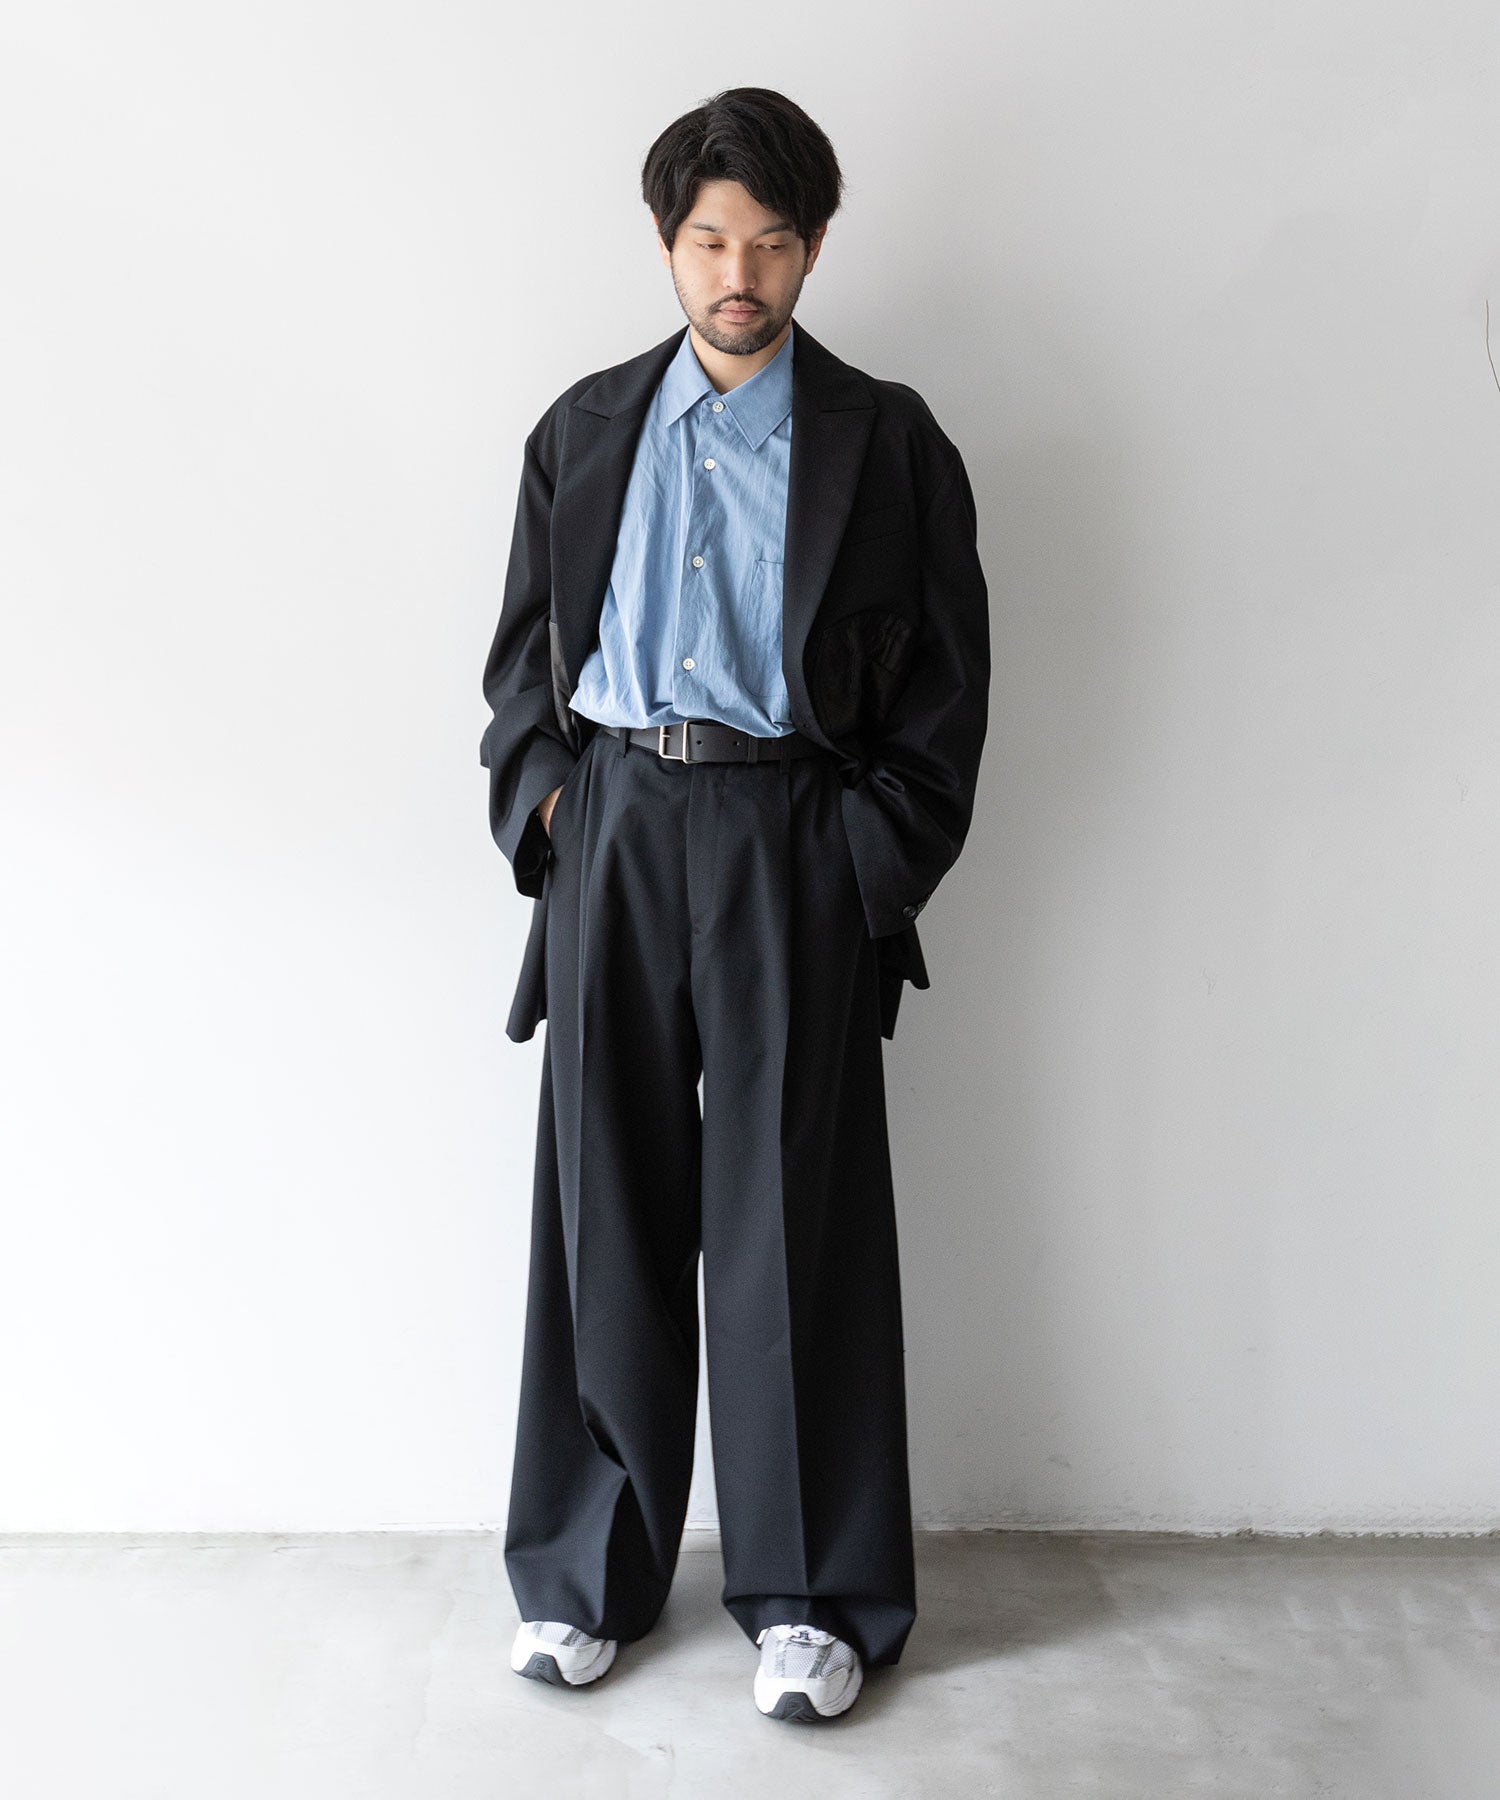 stein / Extra Wide Trousers black S